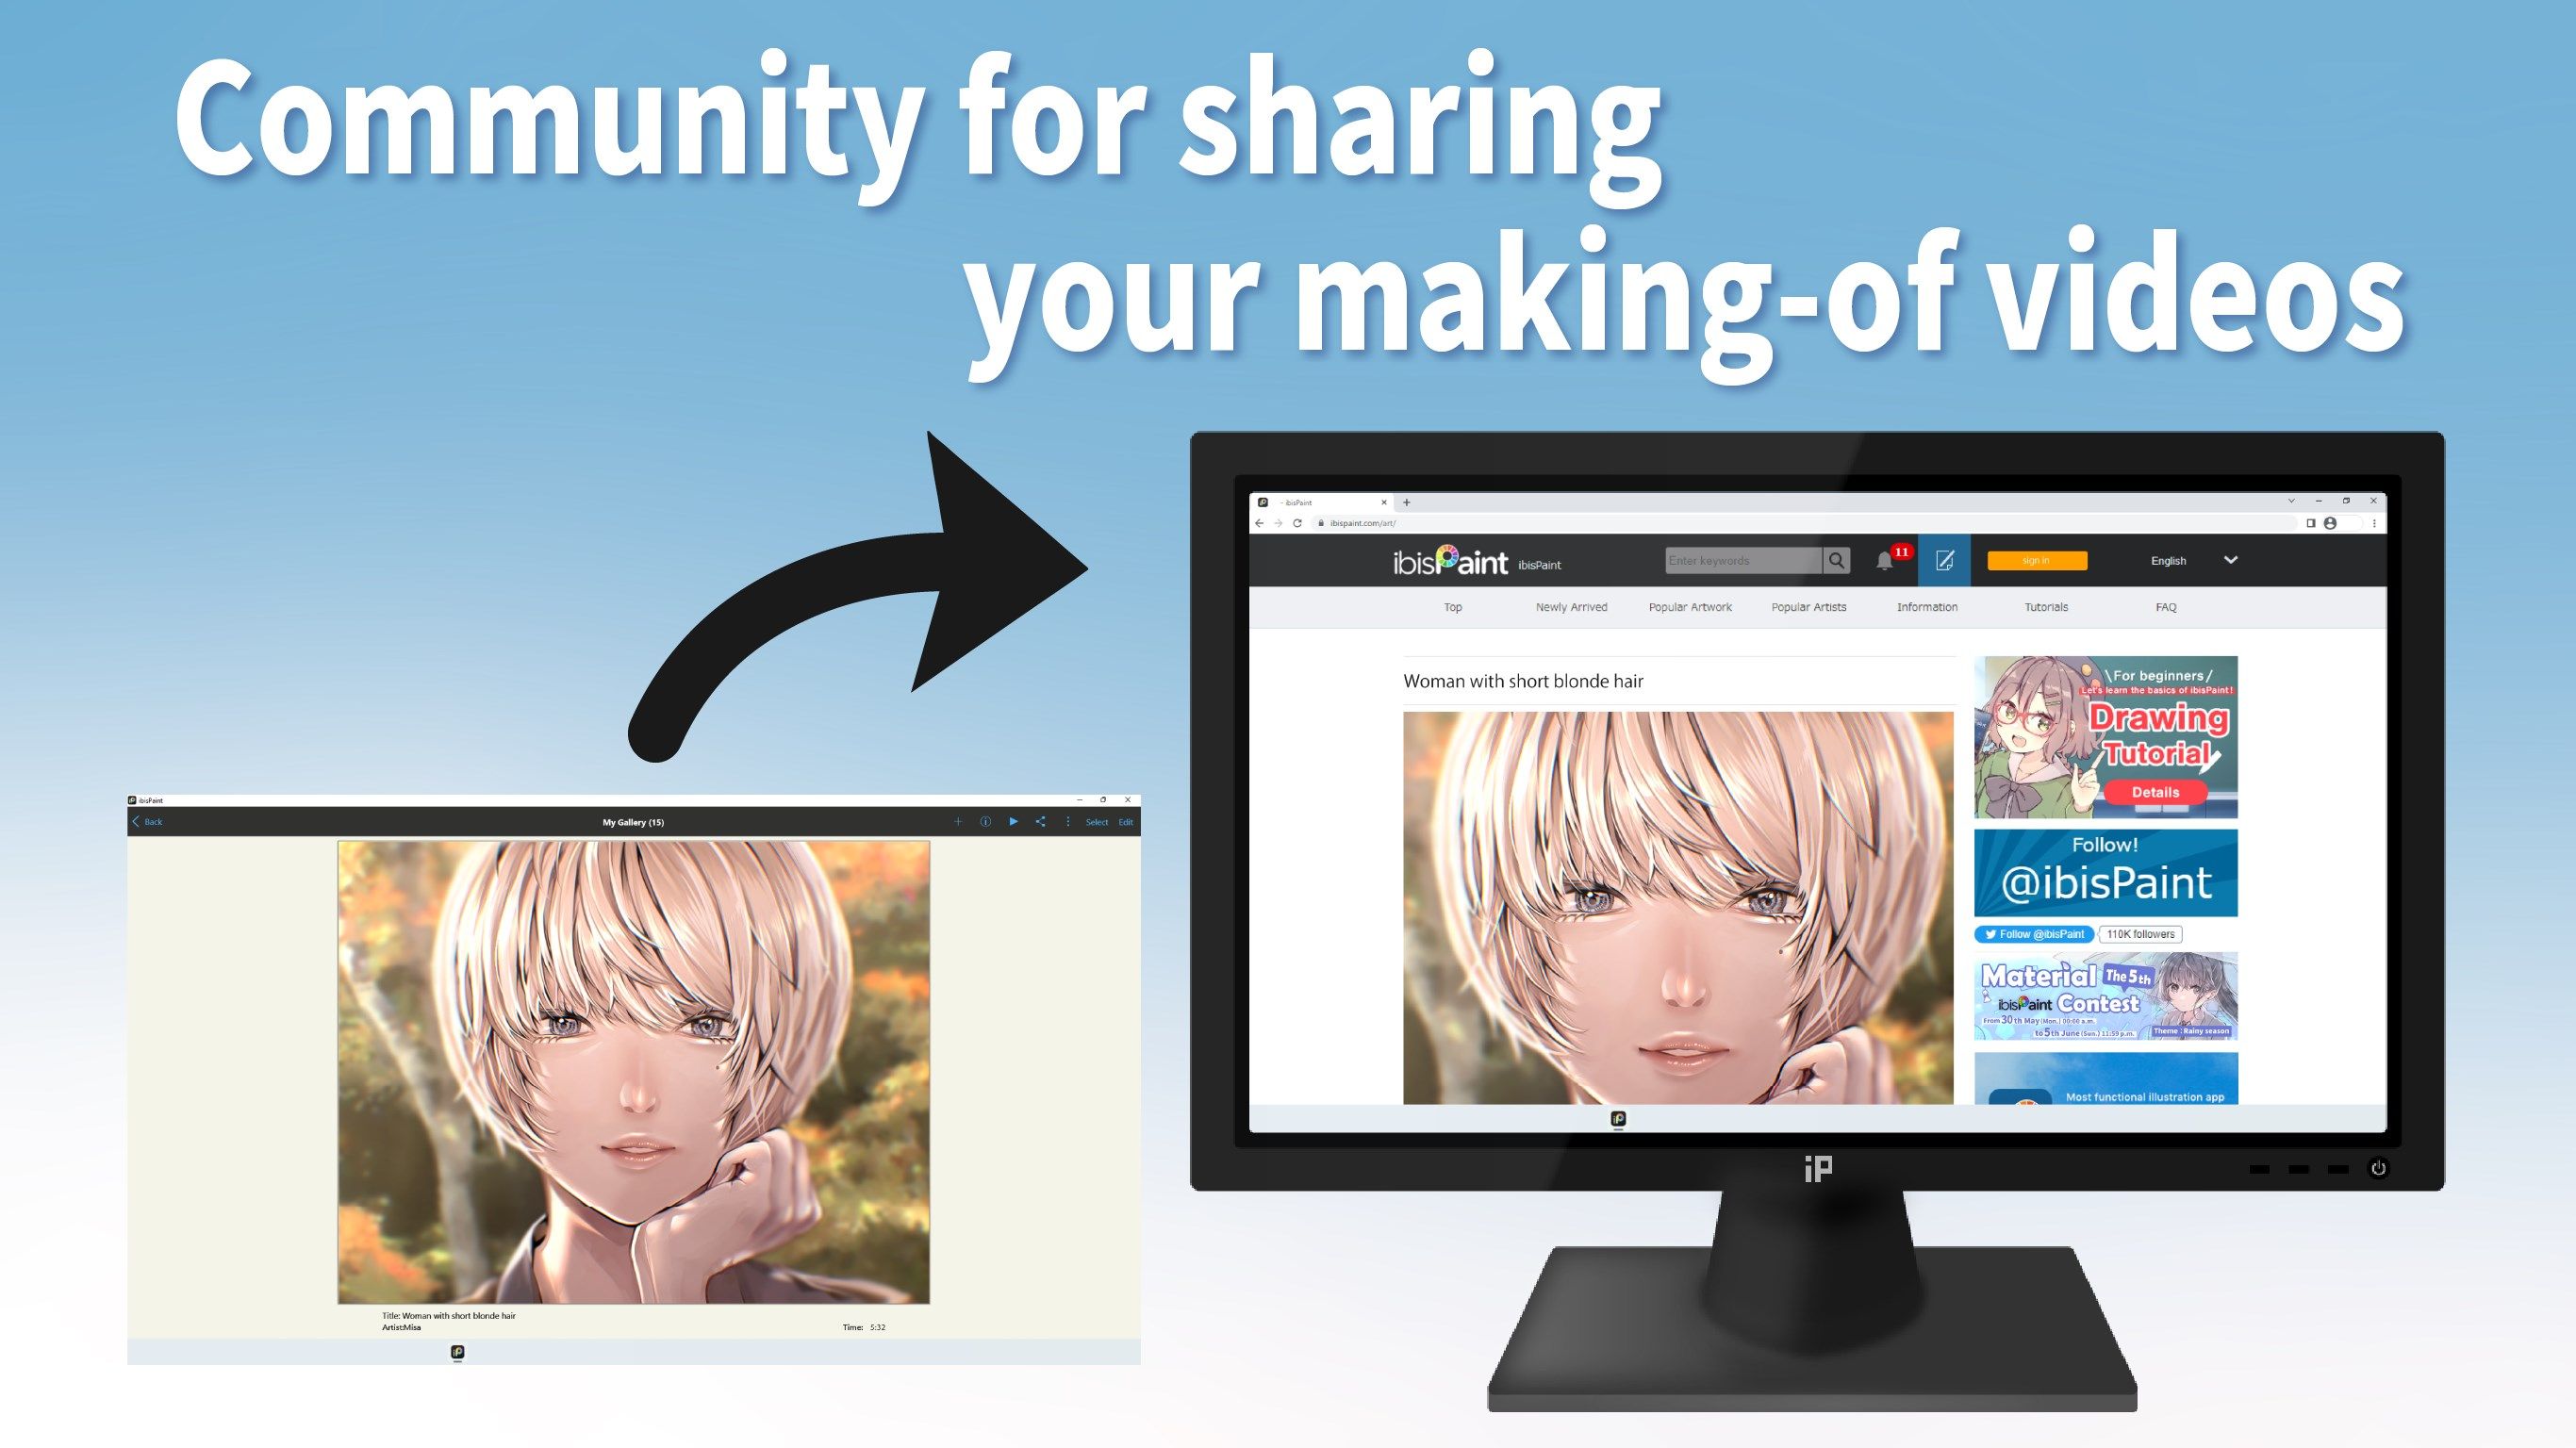 Share your own illustrations! Not just a still illustration, you can also post time-lapse video to community!.
Share and communicate with people from all over the world!